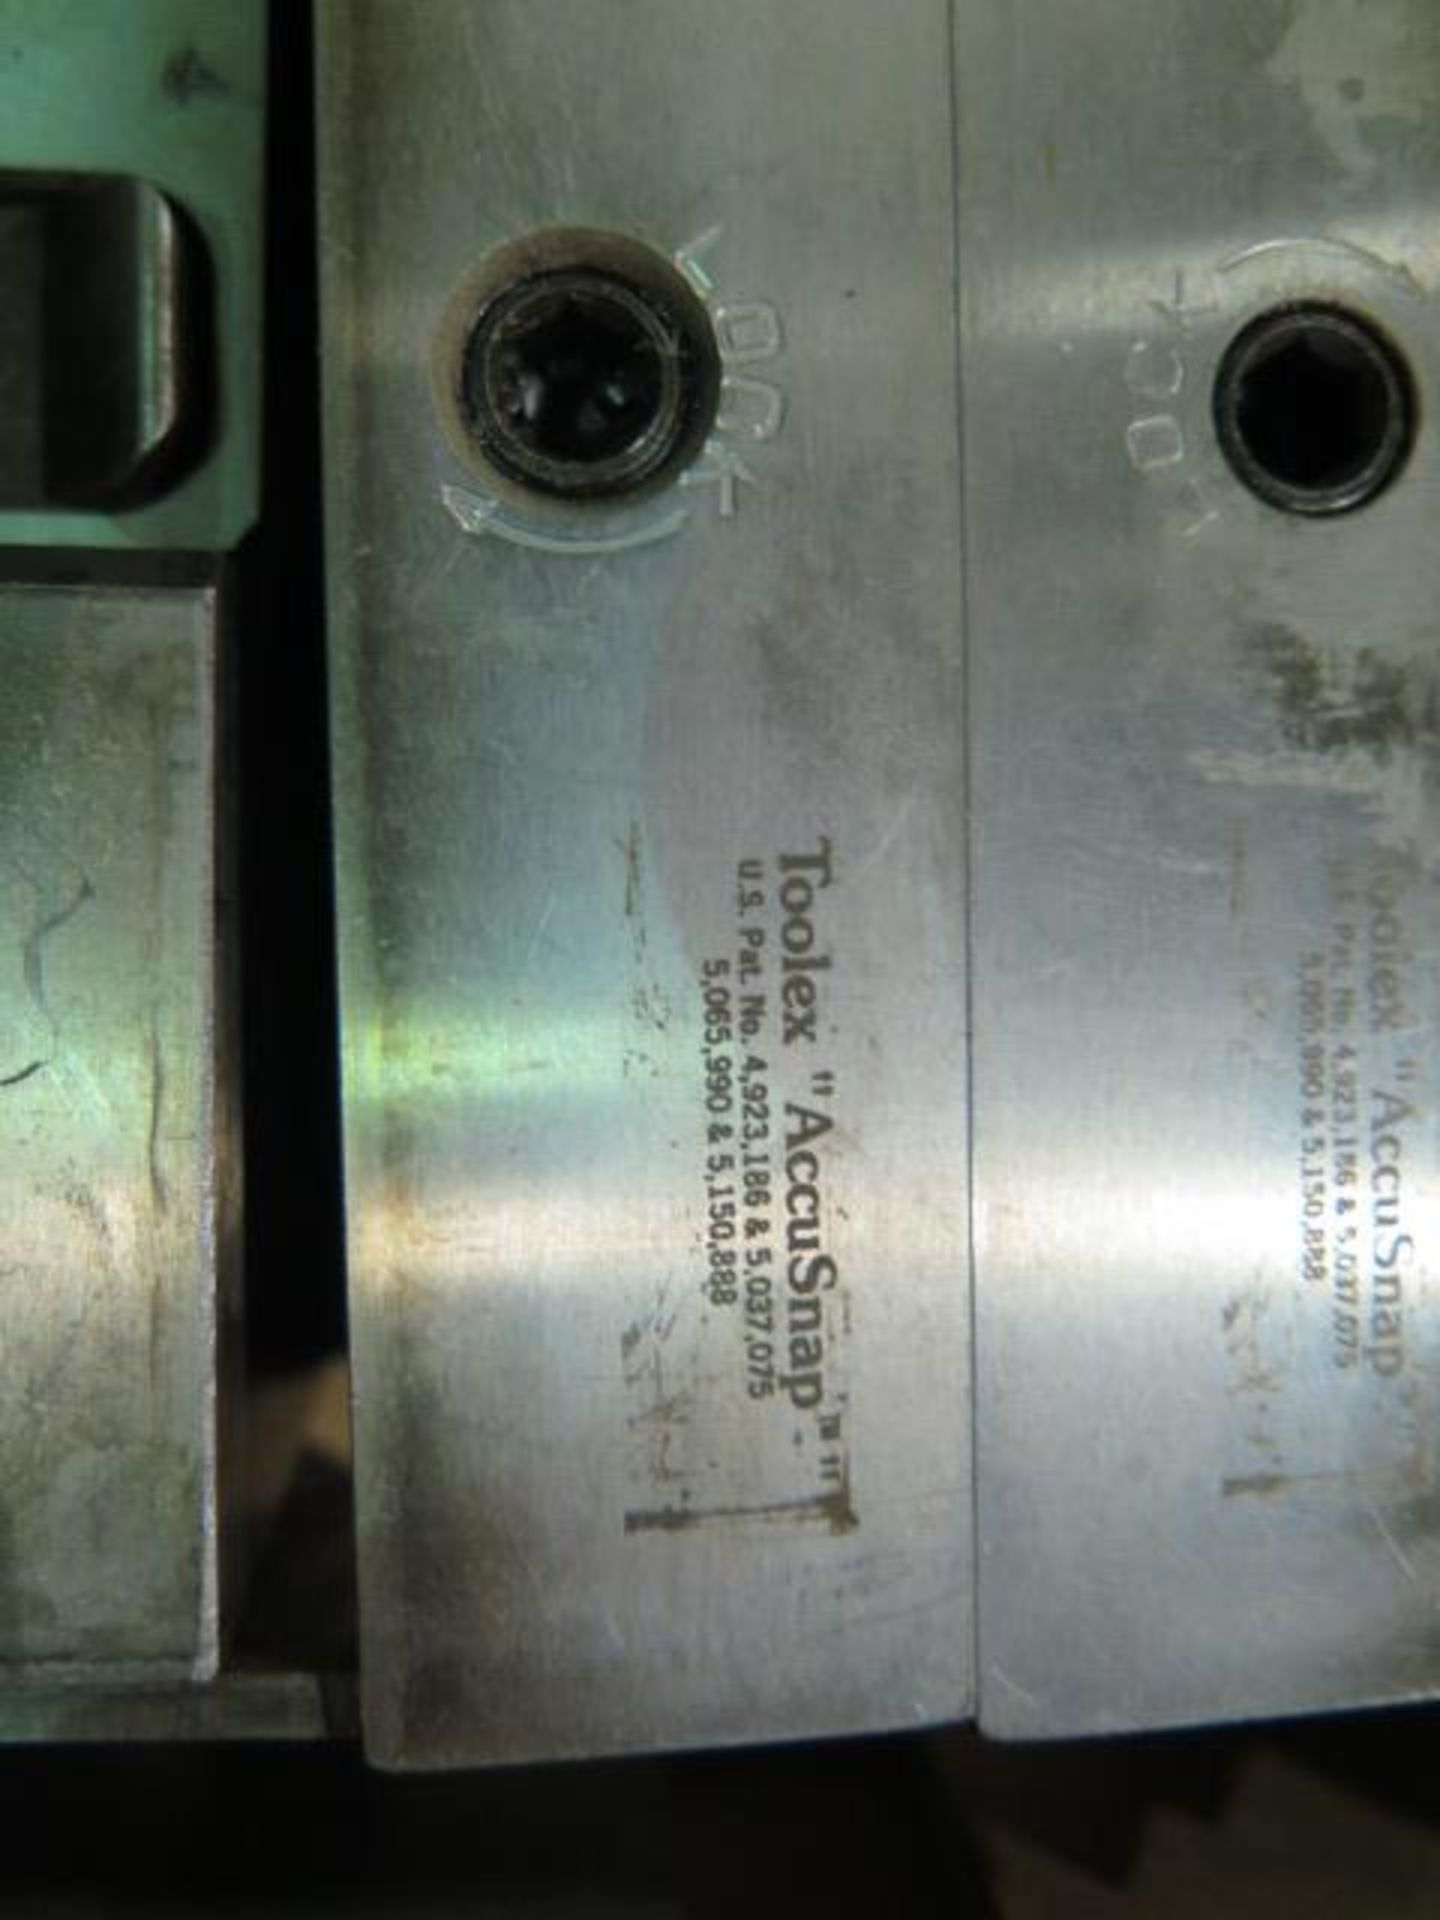 Toolex "Accu-Snap" 8" Master Jaw Sets (4) w/ Snap-In Parallel Sets (SOLD AS-IS - NO WARRANTY) - Image 5 of 5